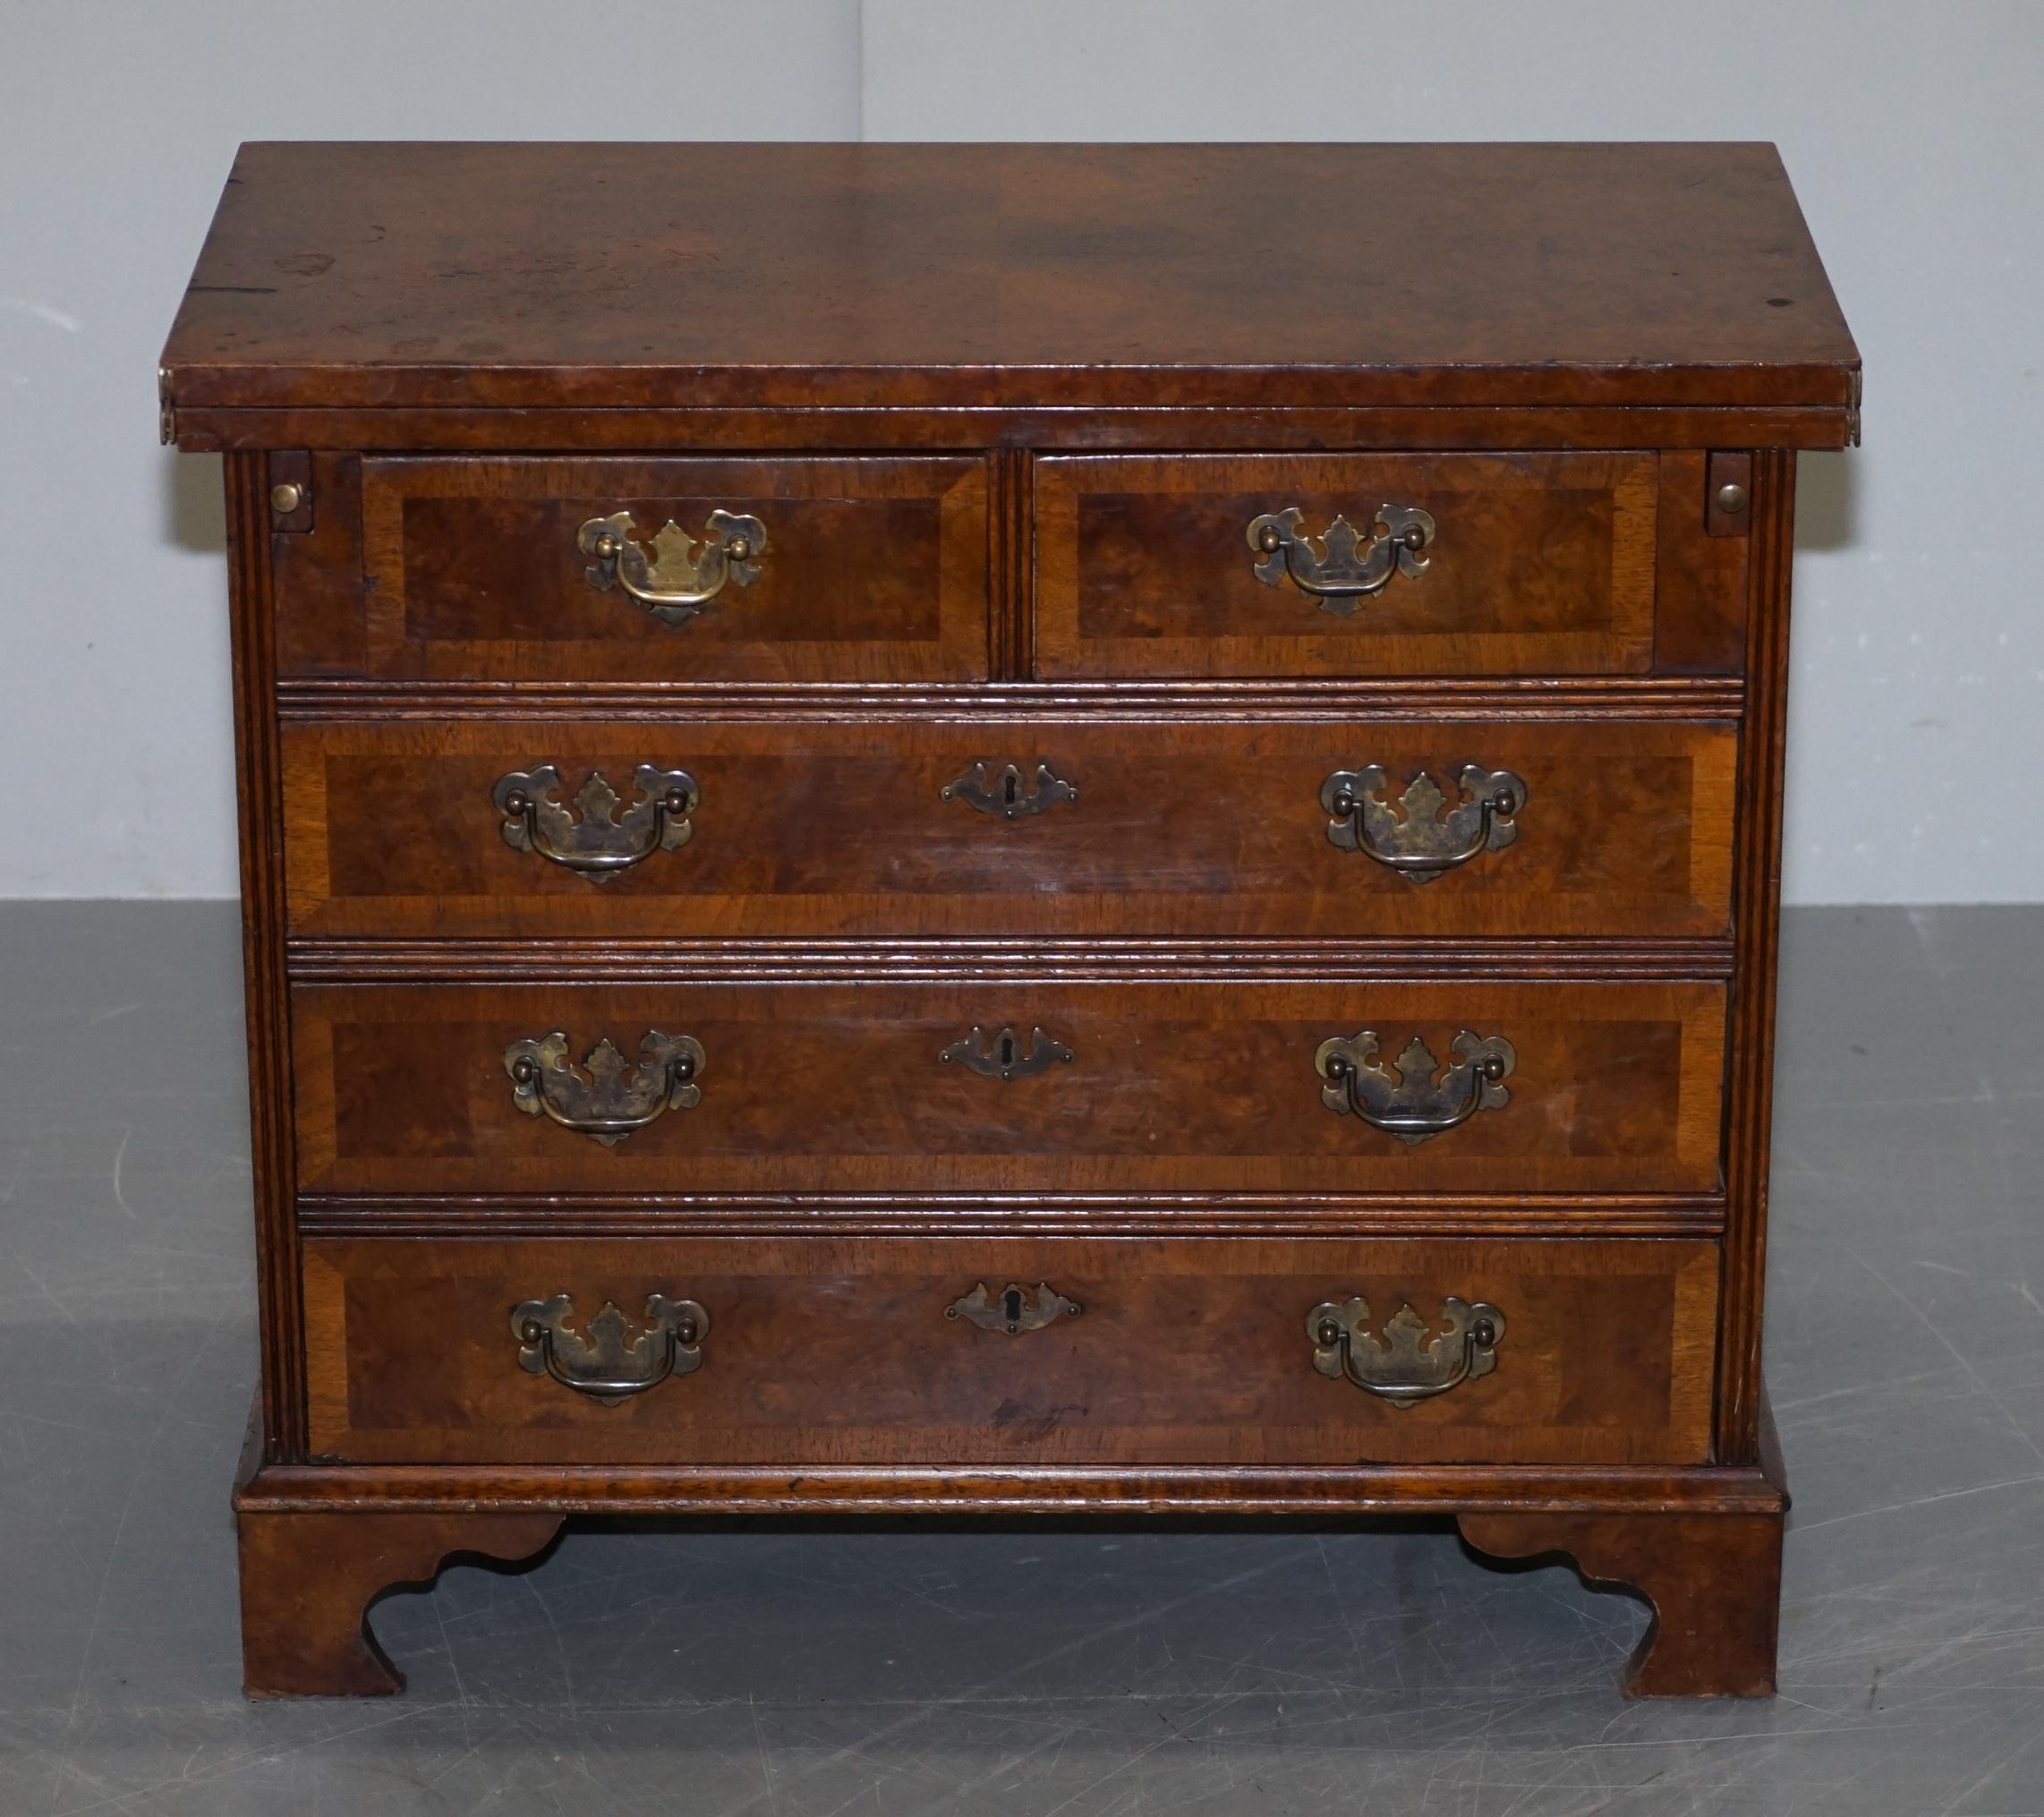 We are delighted to offer for sale this lovely vintage circa 1940s burr walnut bachelors chest of drawers with folding butlers serving tray

A very good looking and well made chest of drawers with a folding butlers serving tray, it has mixed